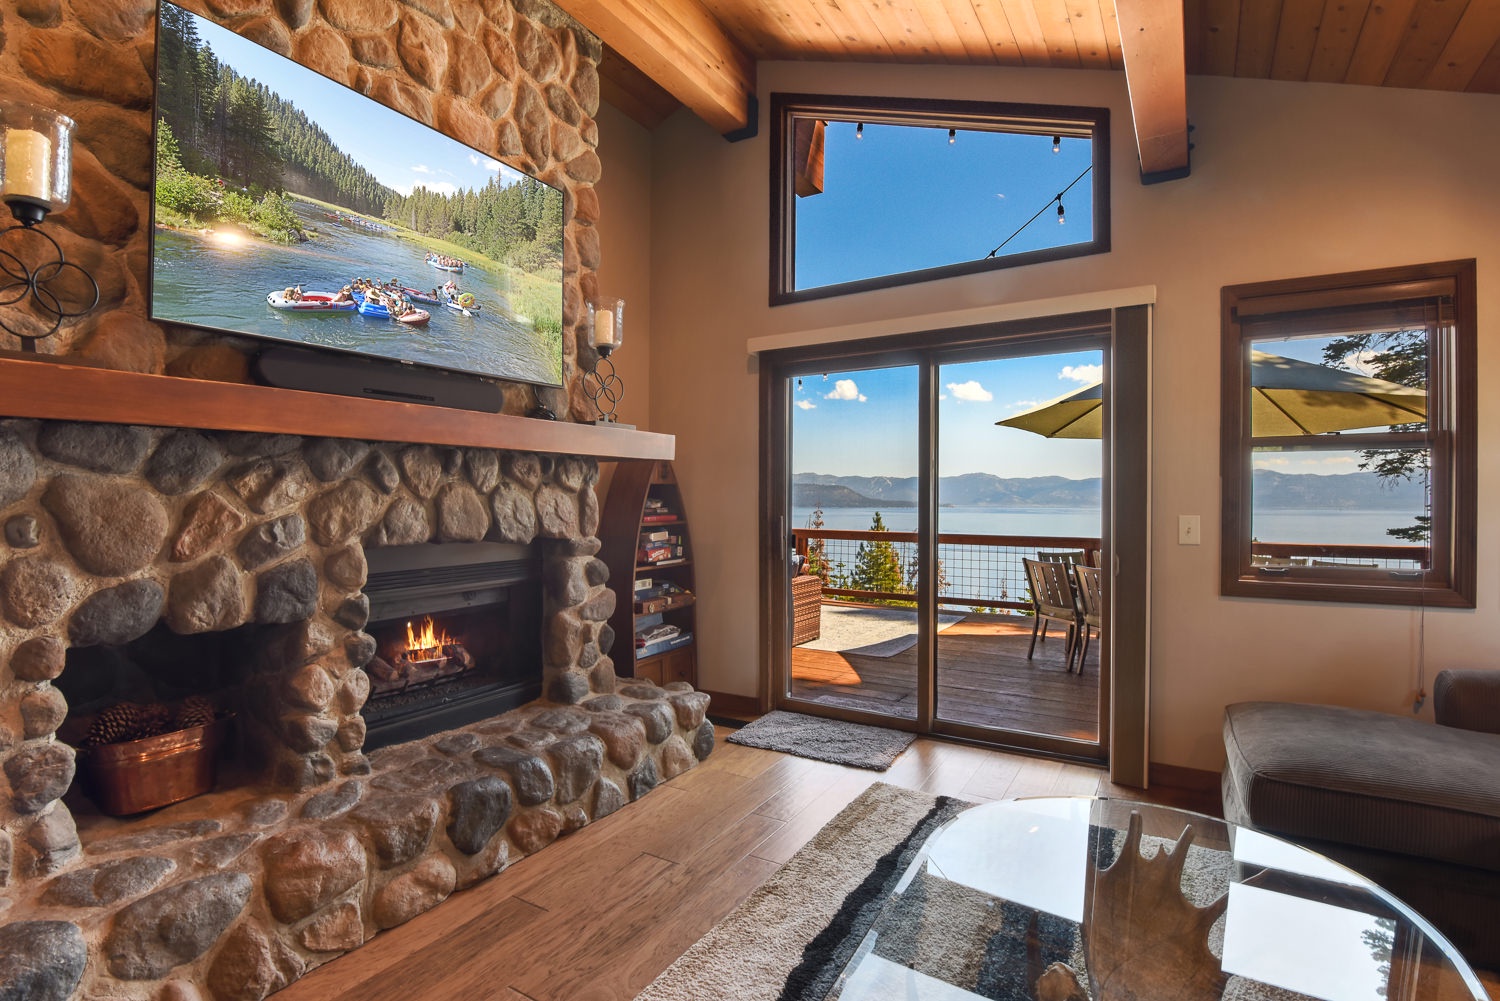 Living room with lake view, TV, fireplace